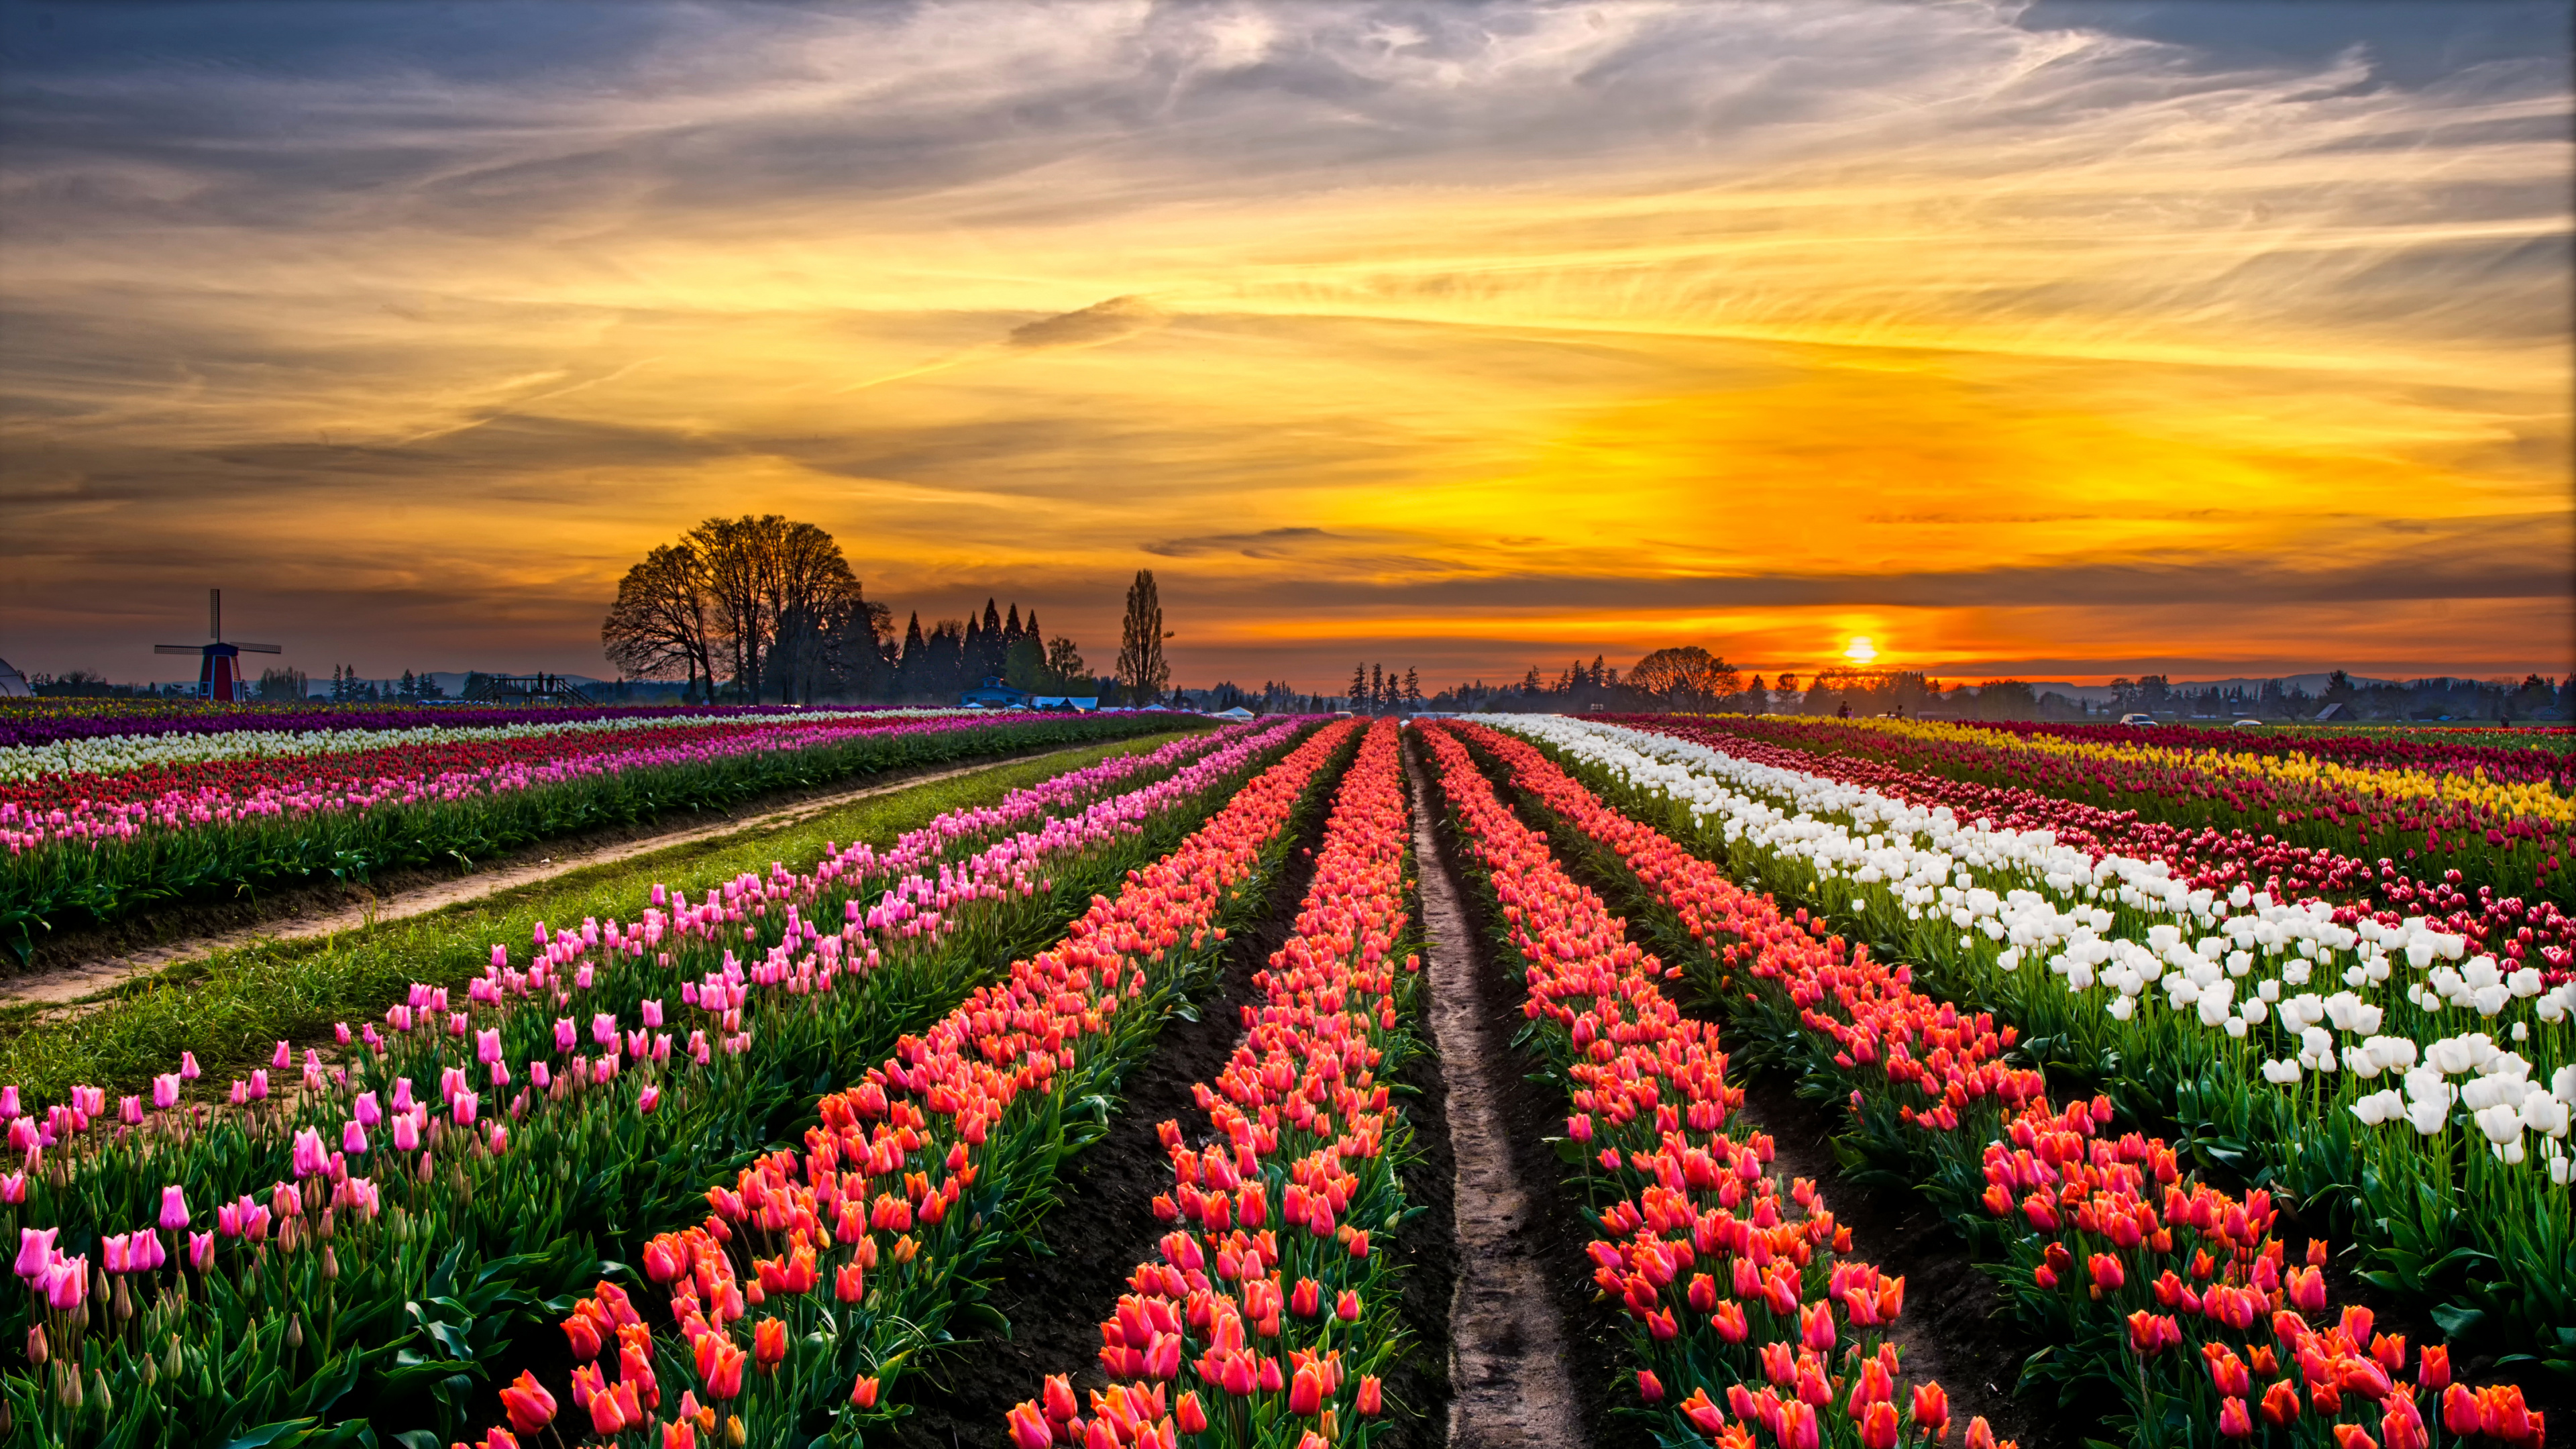 Pink and White Flower Field During Sunset. Wallpaper in 3840x2160 Resolution